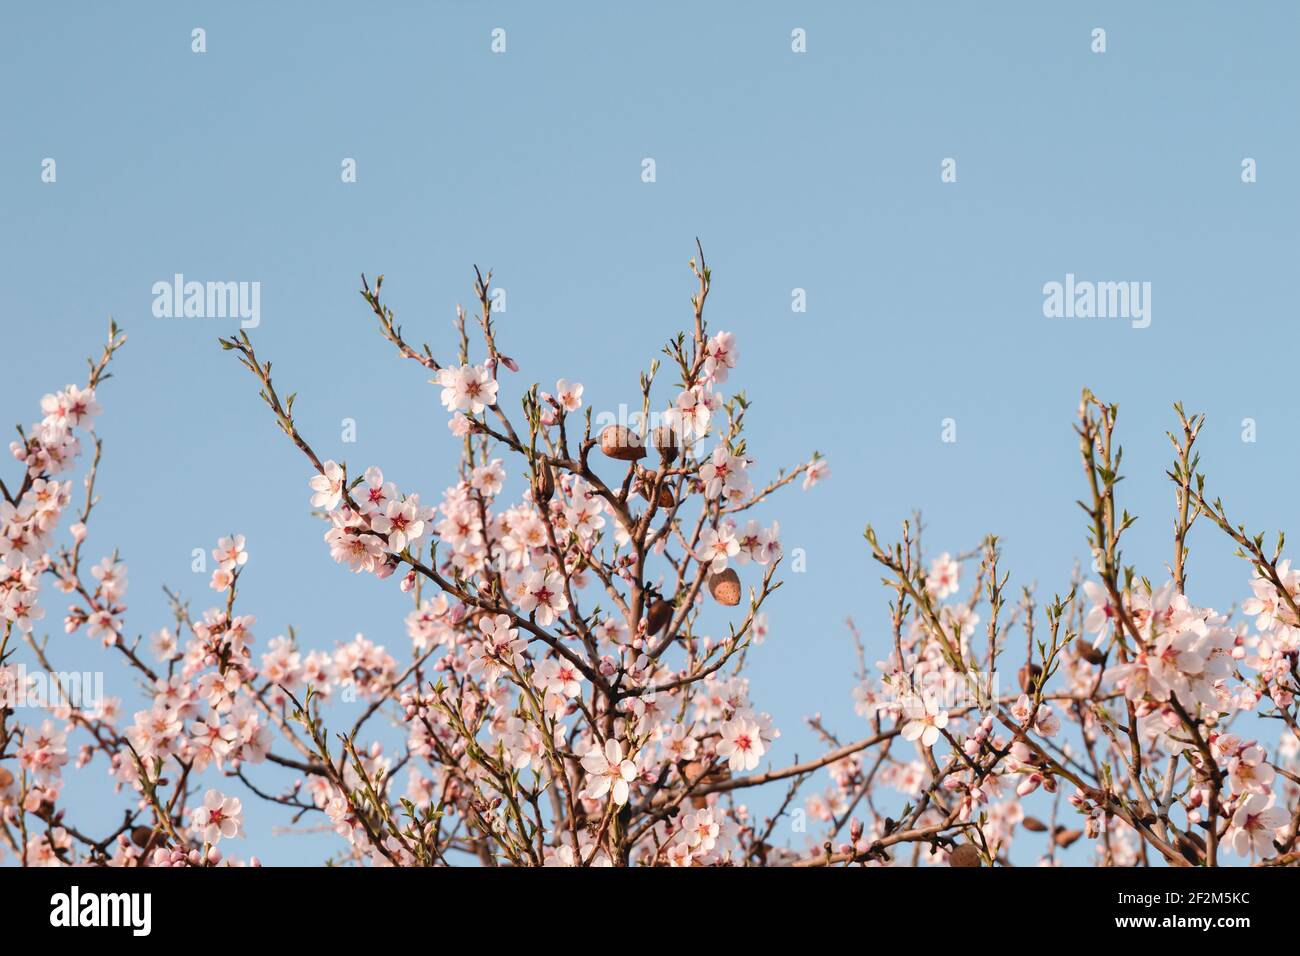 Almond tree blossoms pink flowers blooming in spring Stock Photo